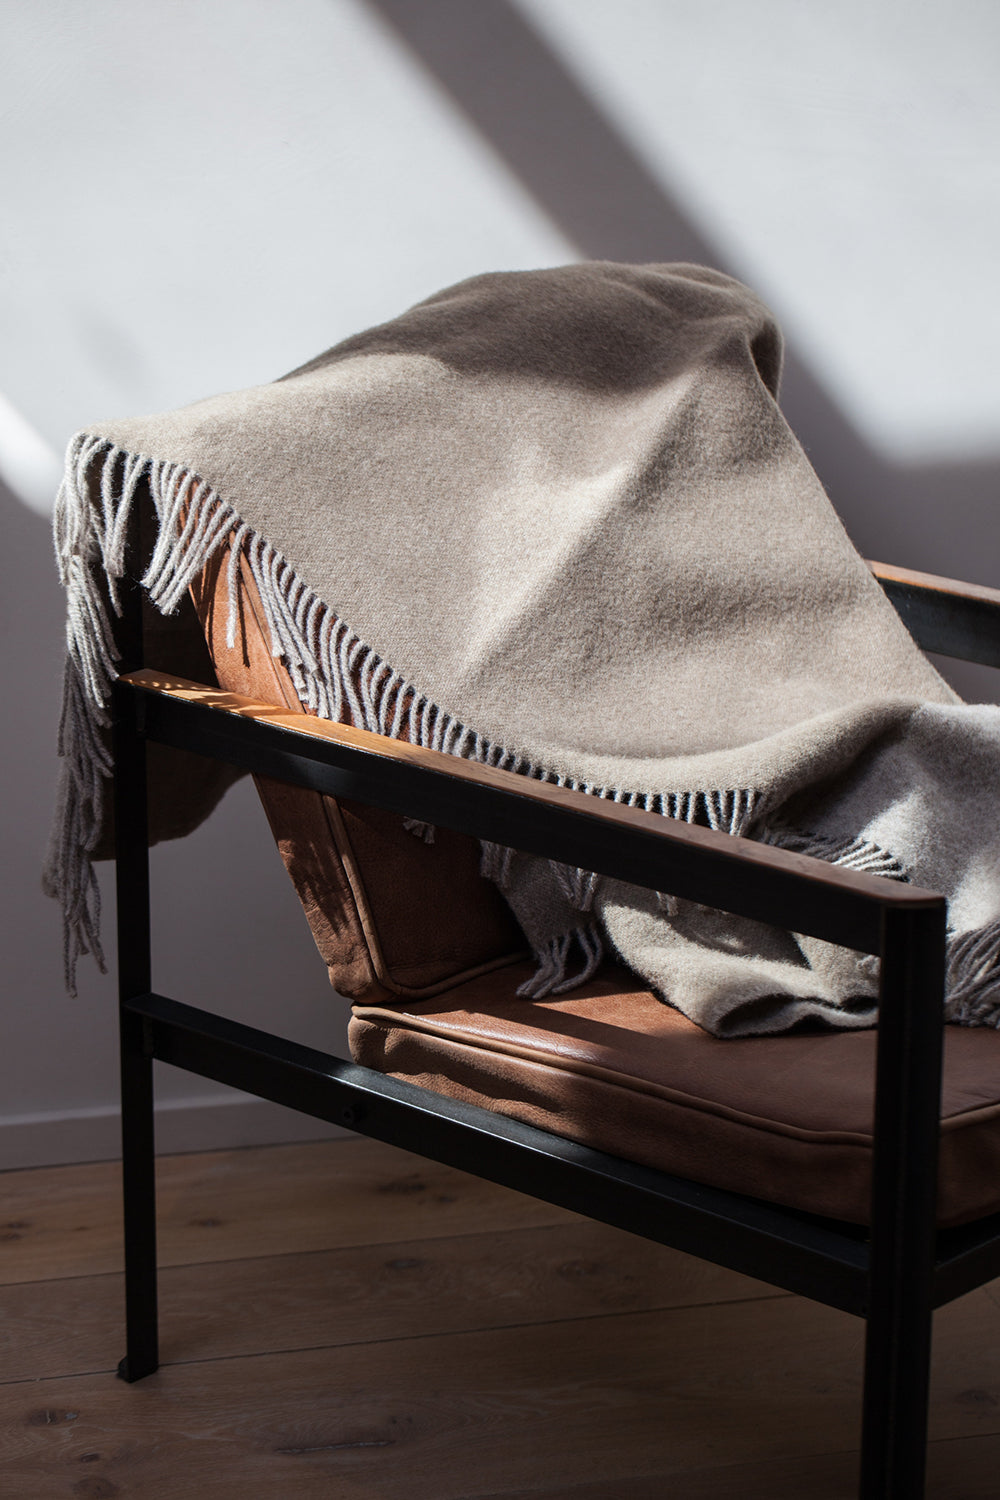 Earth Fawn Blanket by Forestry Wool displayed on a leather chair, adding a cozy and inviting touch to the space.